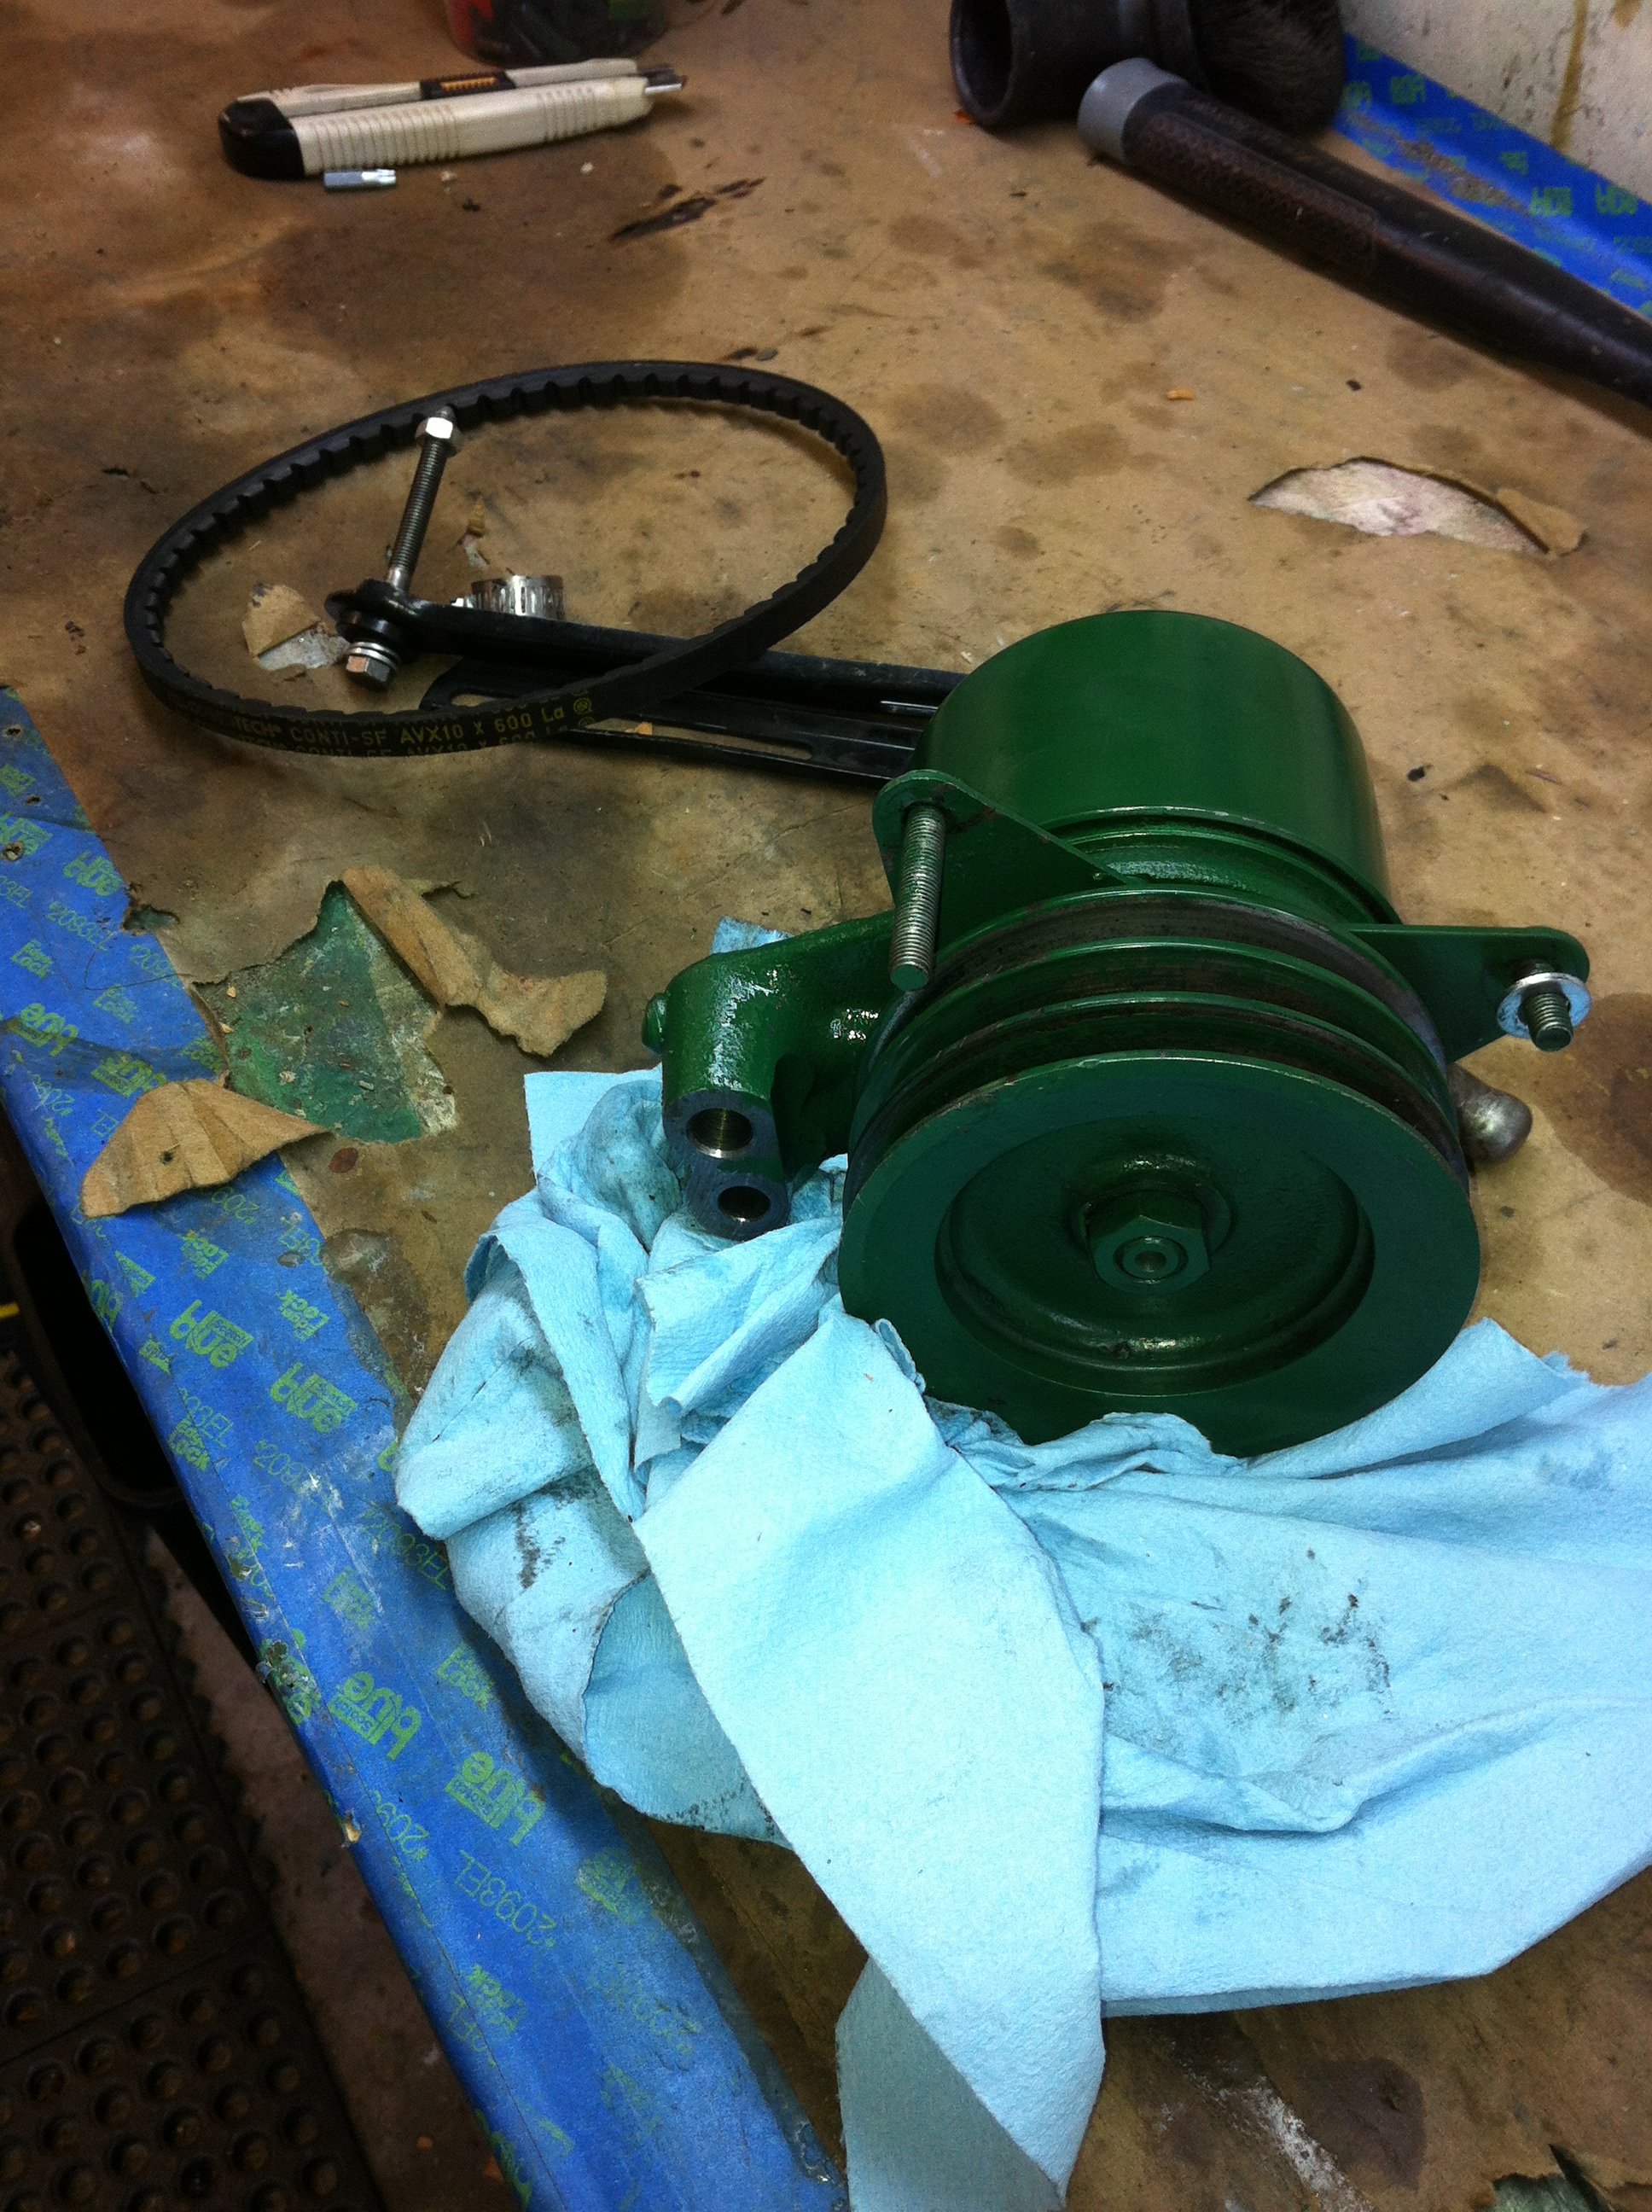 And it\'s out. I\'ll send it to Steve Hammond at Citraulics in Sylmar, CA for an overhaul.